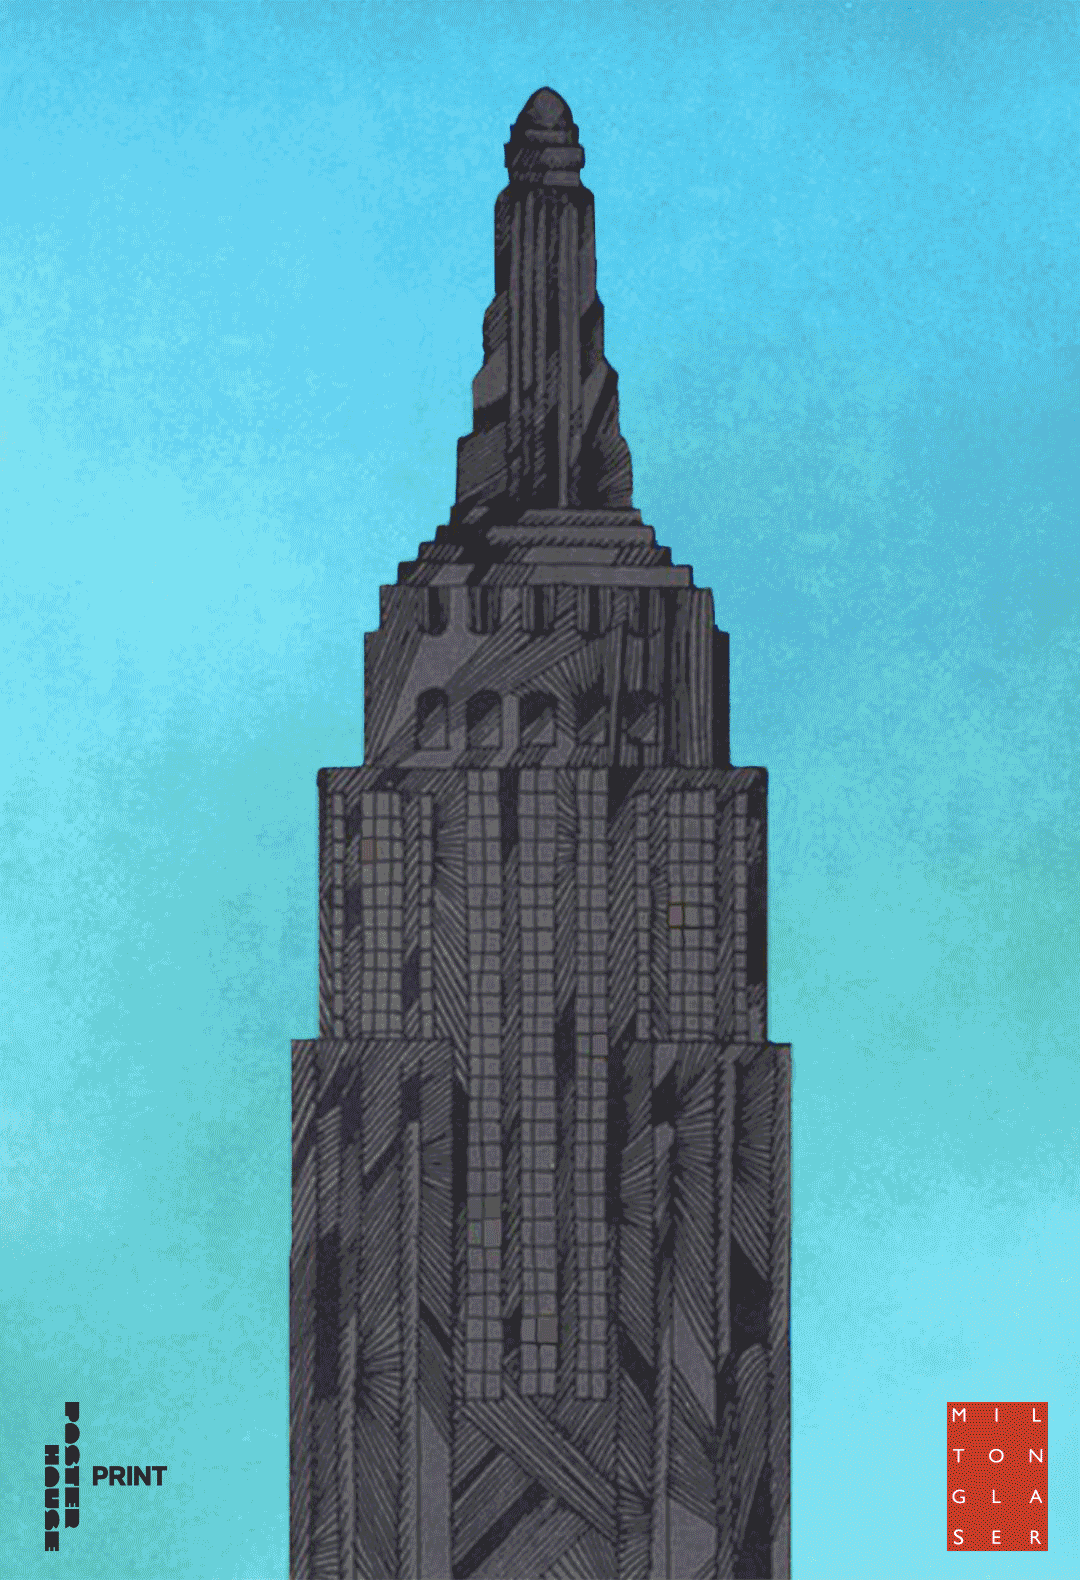 illustrative poster by Milton Glaser of the empire state building